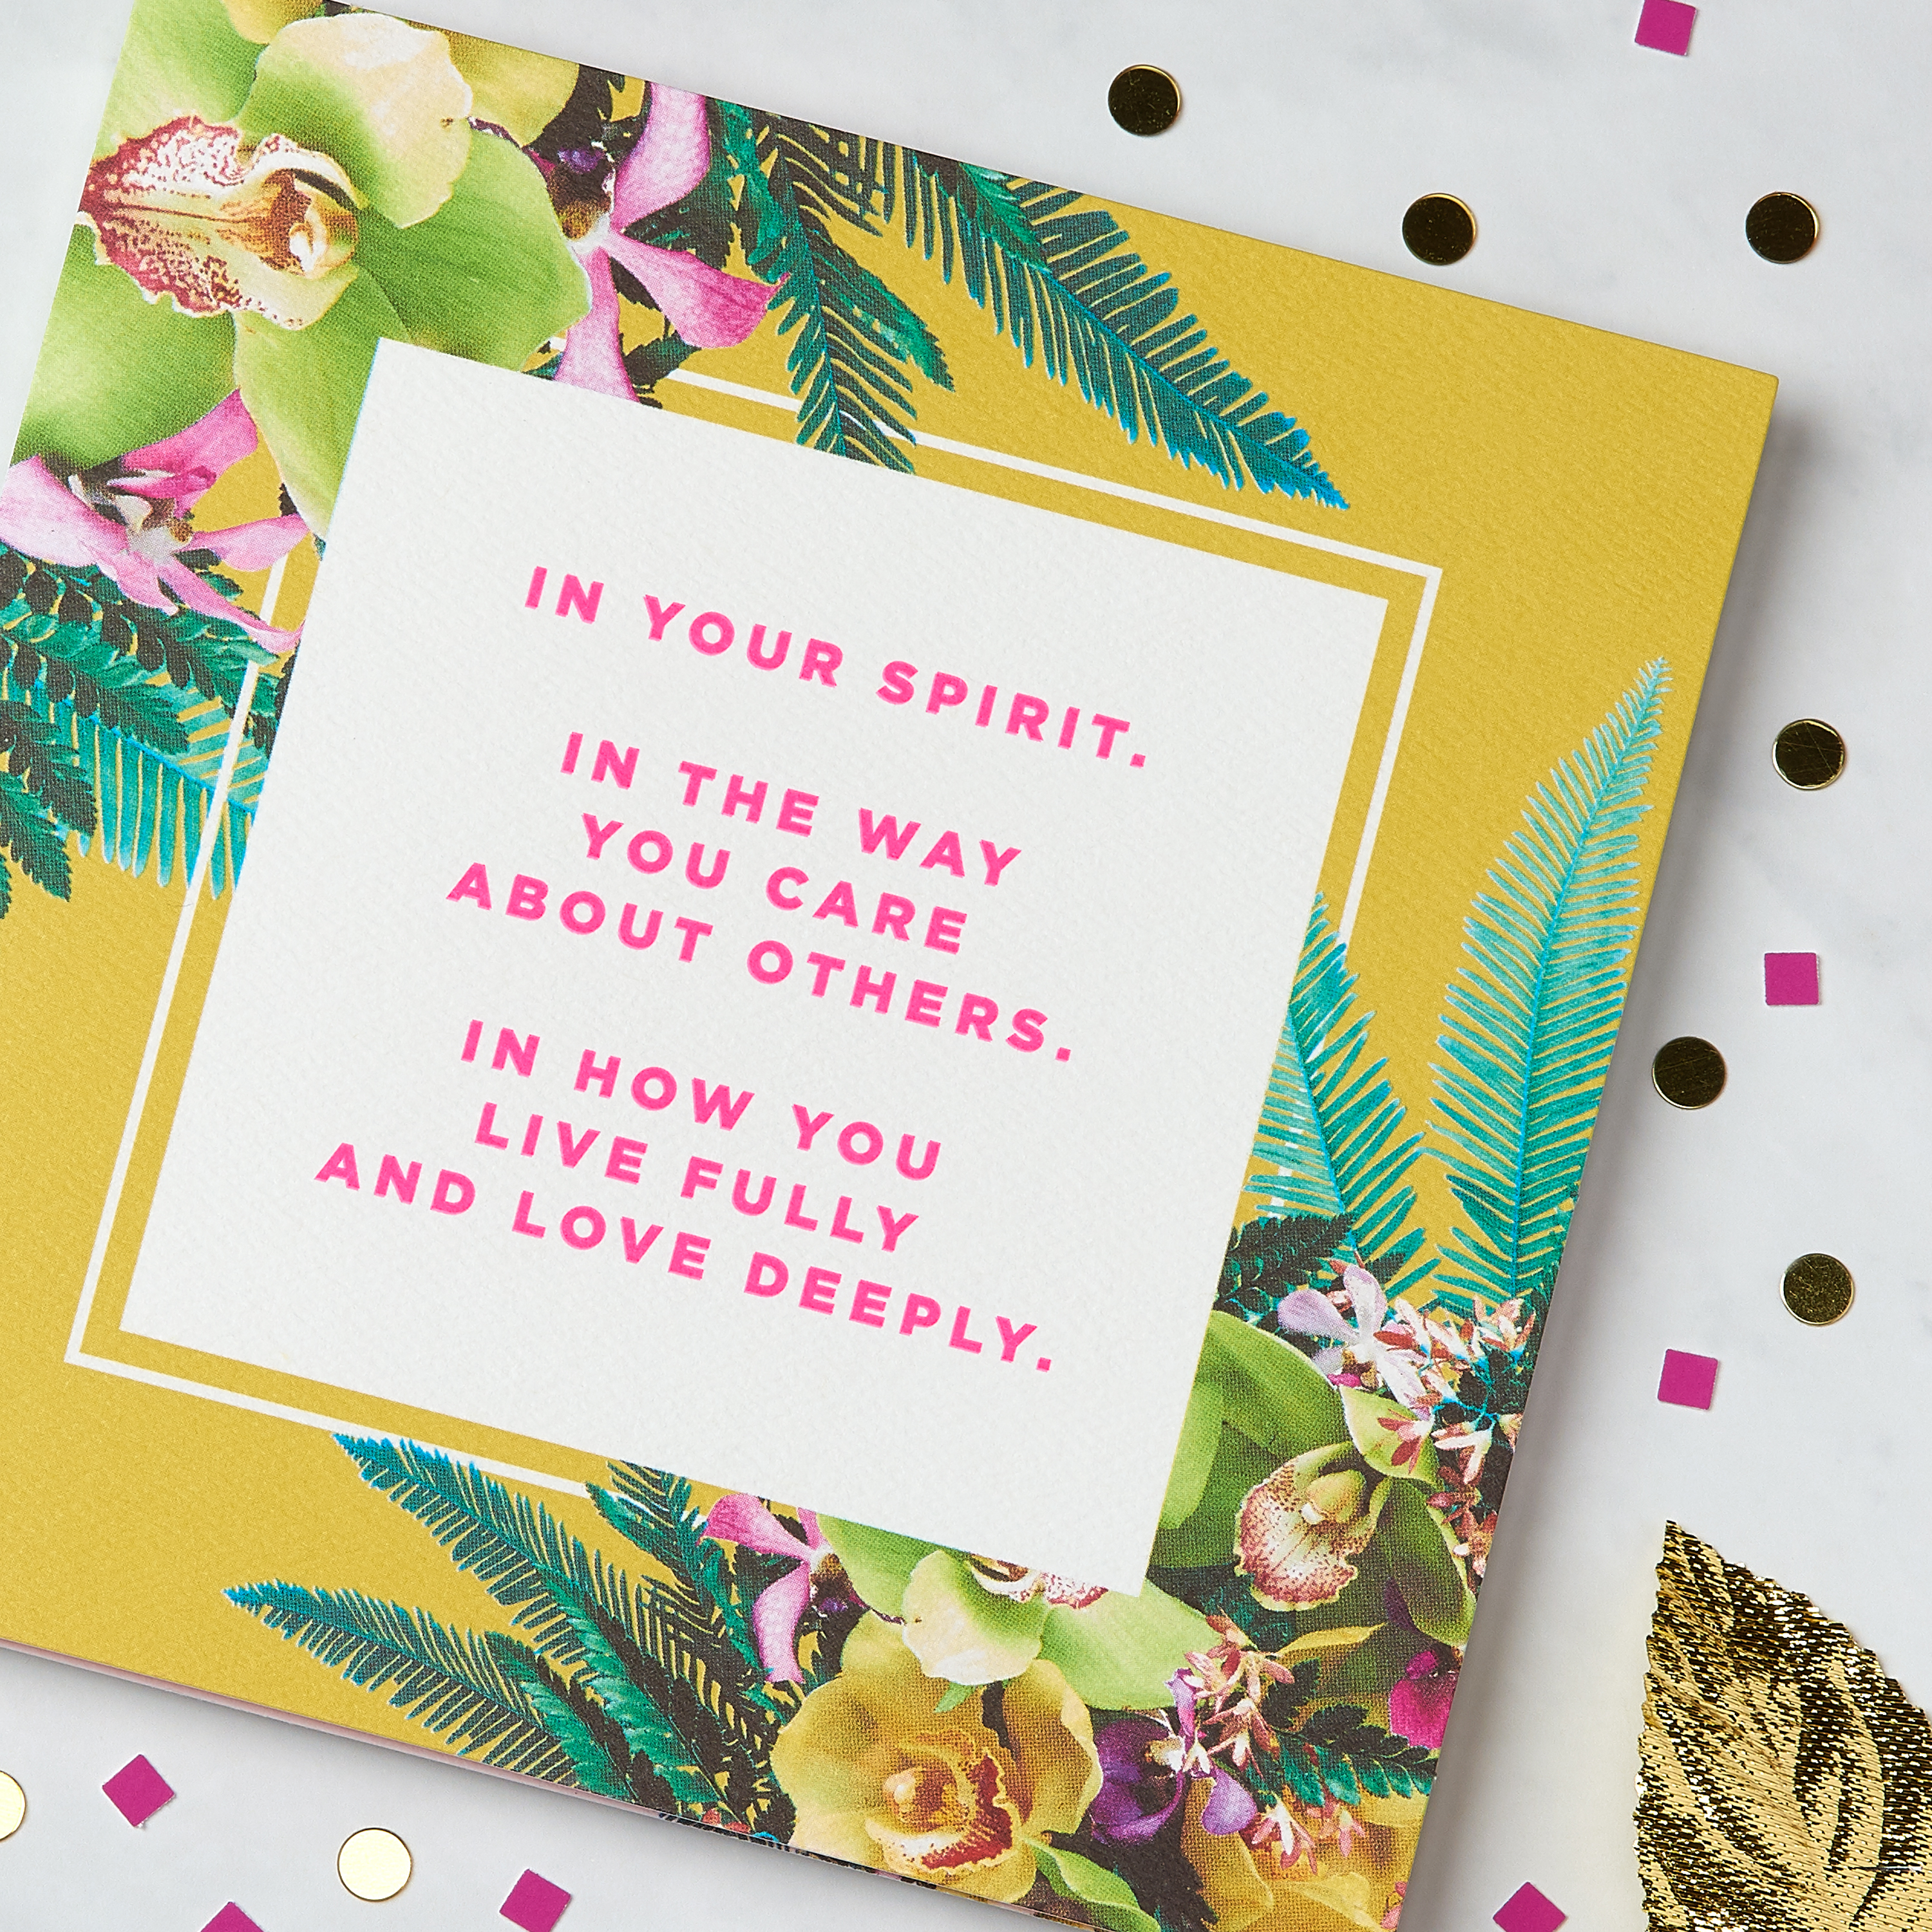 Spirit Greeting Card for Her - Birthday, Thinking of You, Encouragement, Friendship image